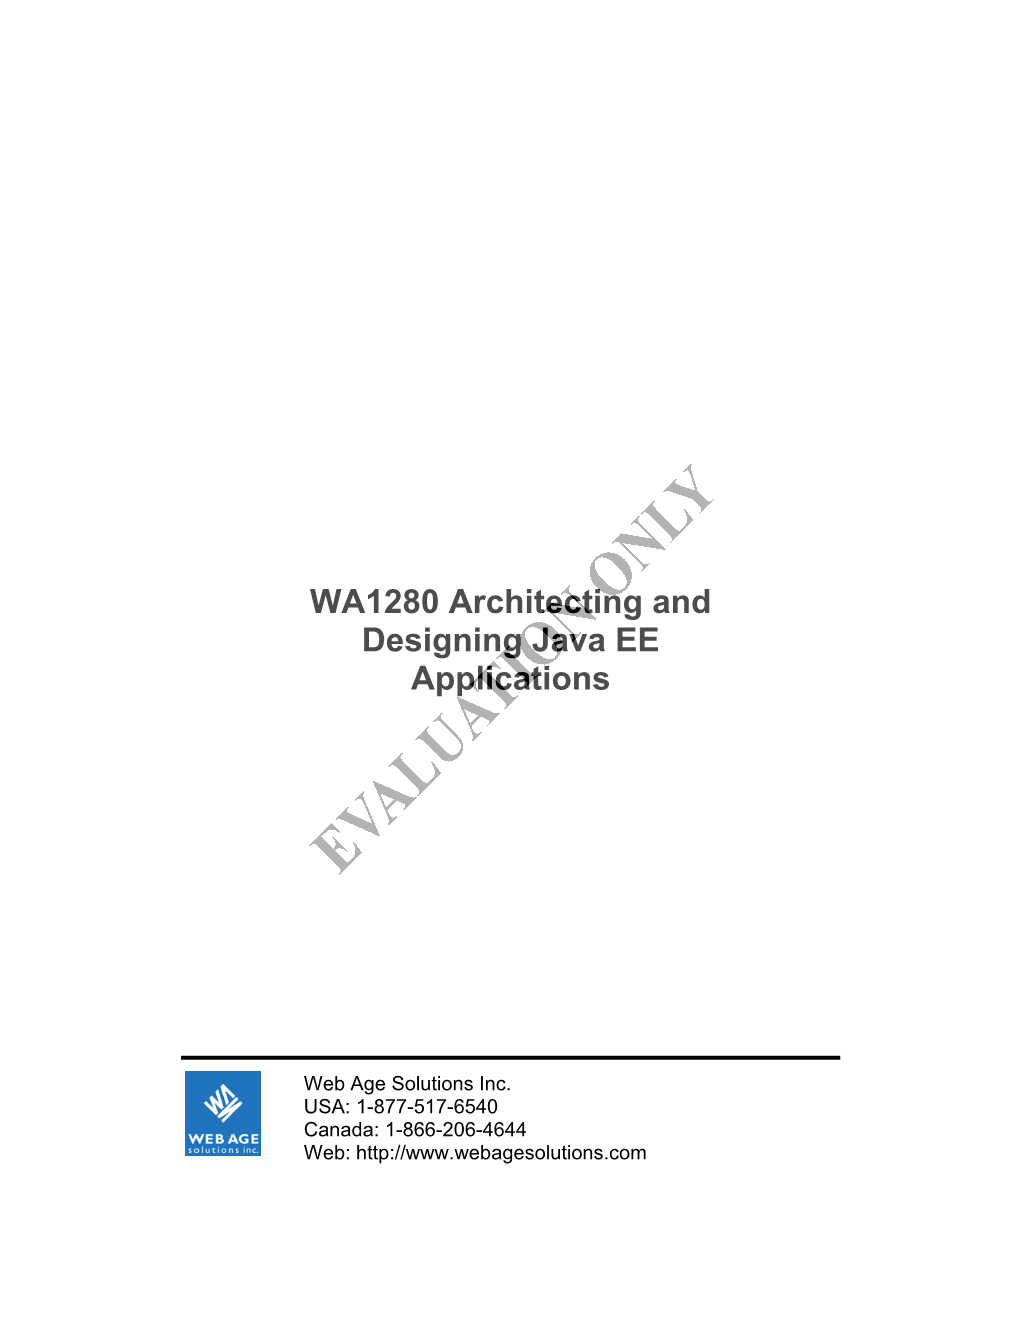 WA1280 Architecting and Designing Java EE Applications